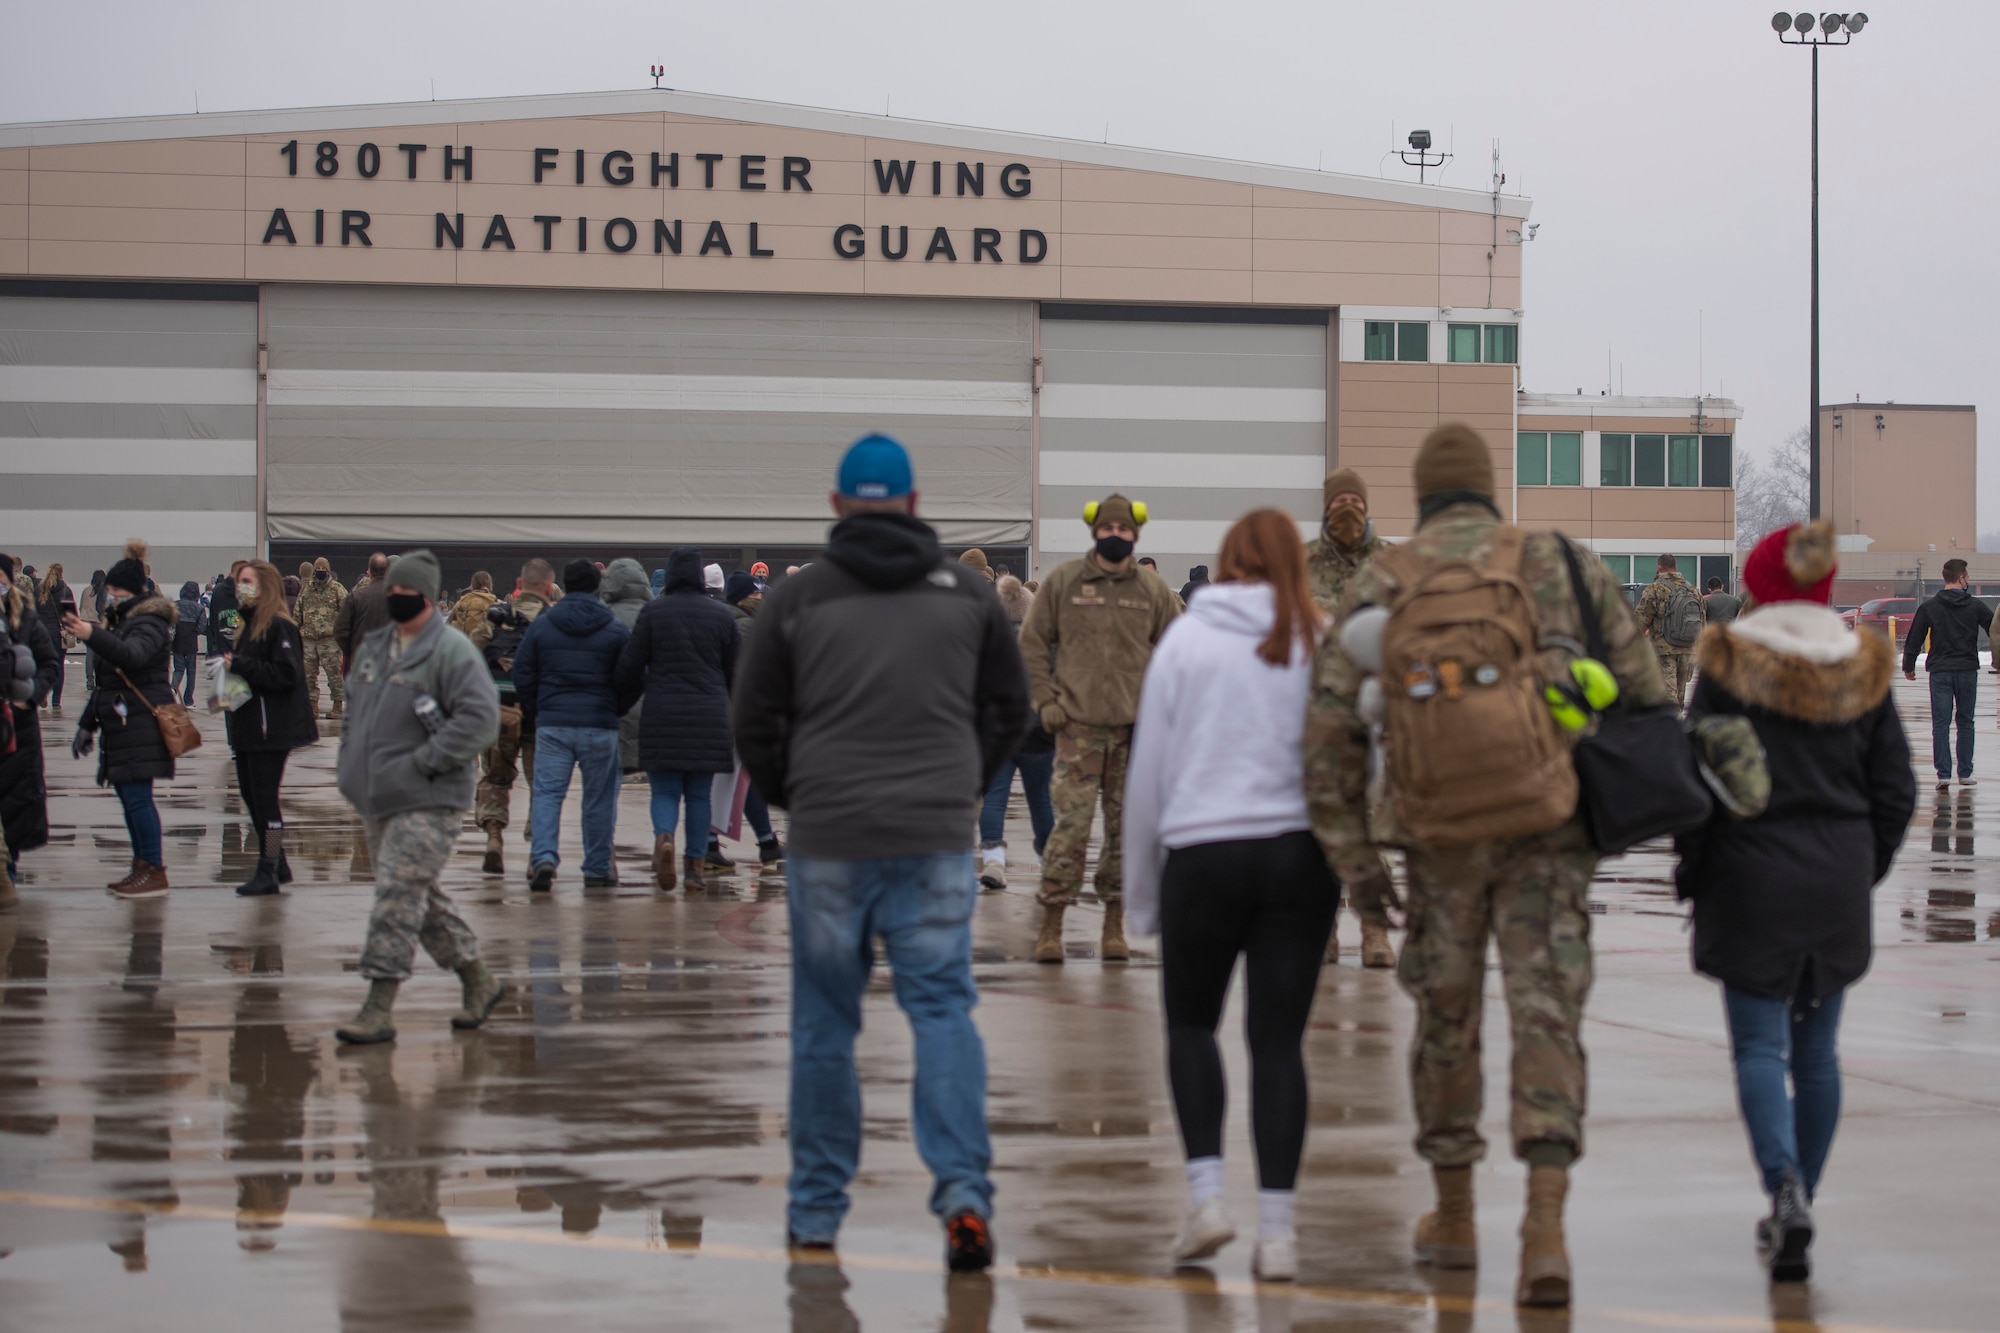 Friends and family walk to the hanger with Airmen who have returned home from their overseas deployment, Jan. 26, 2020 at the 180FW in Swanton, Ohio.